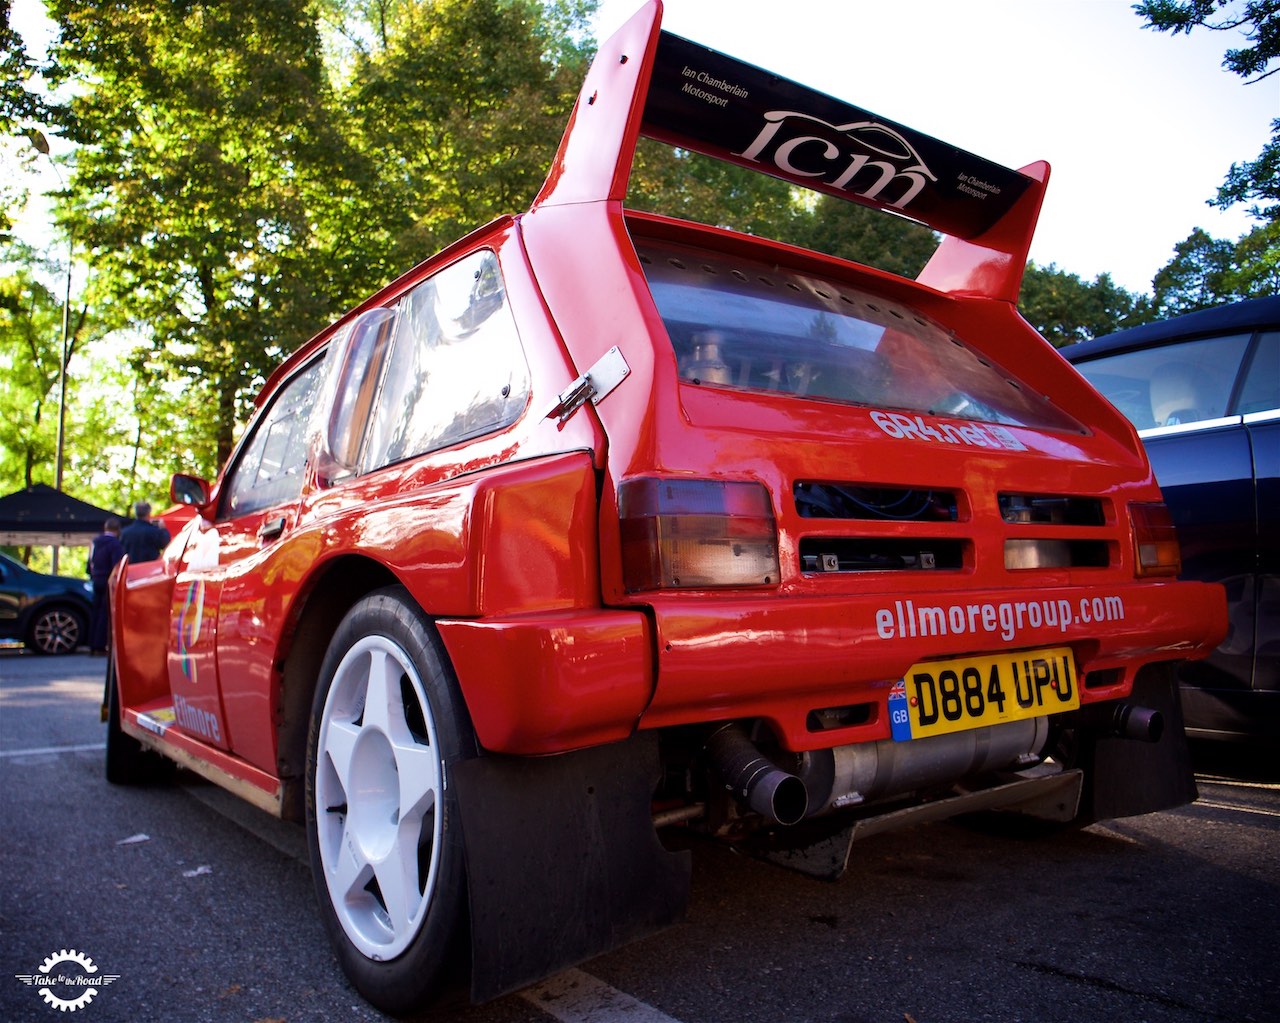 Take to the Road Video Feature Metro 6R4 Group B Rally Car